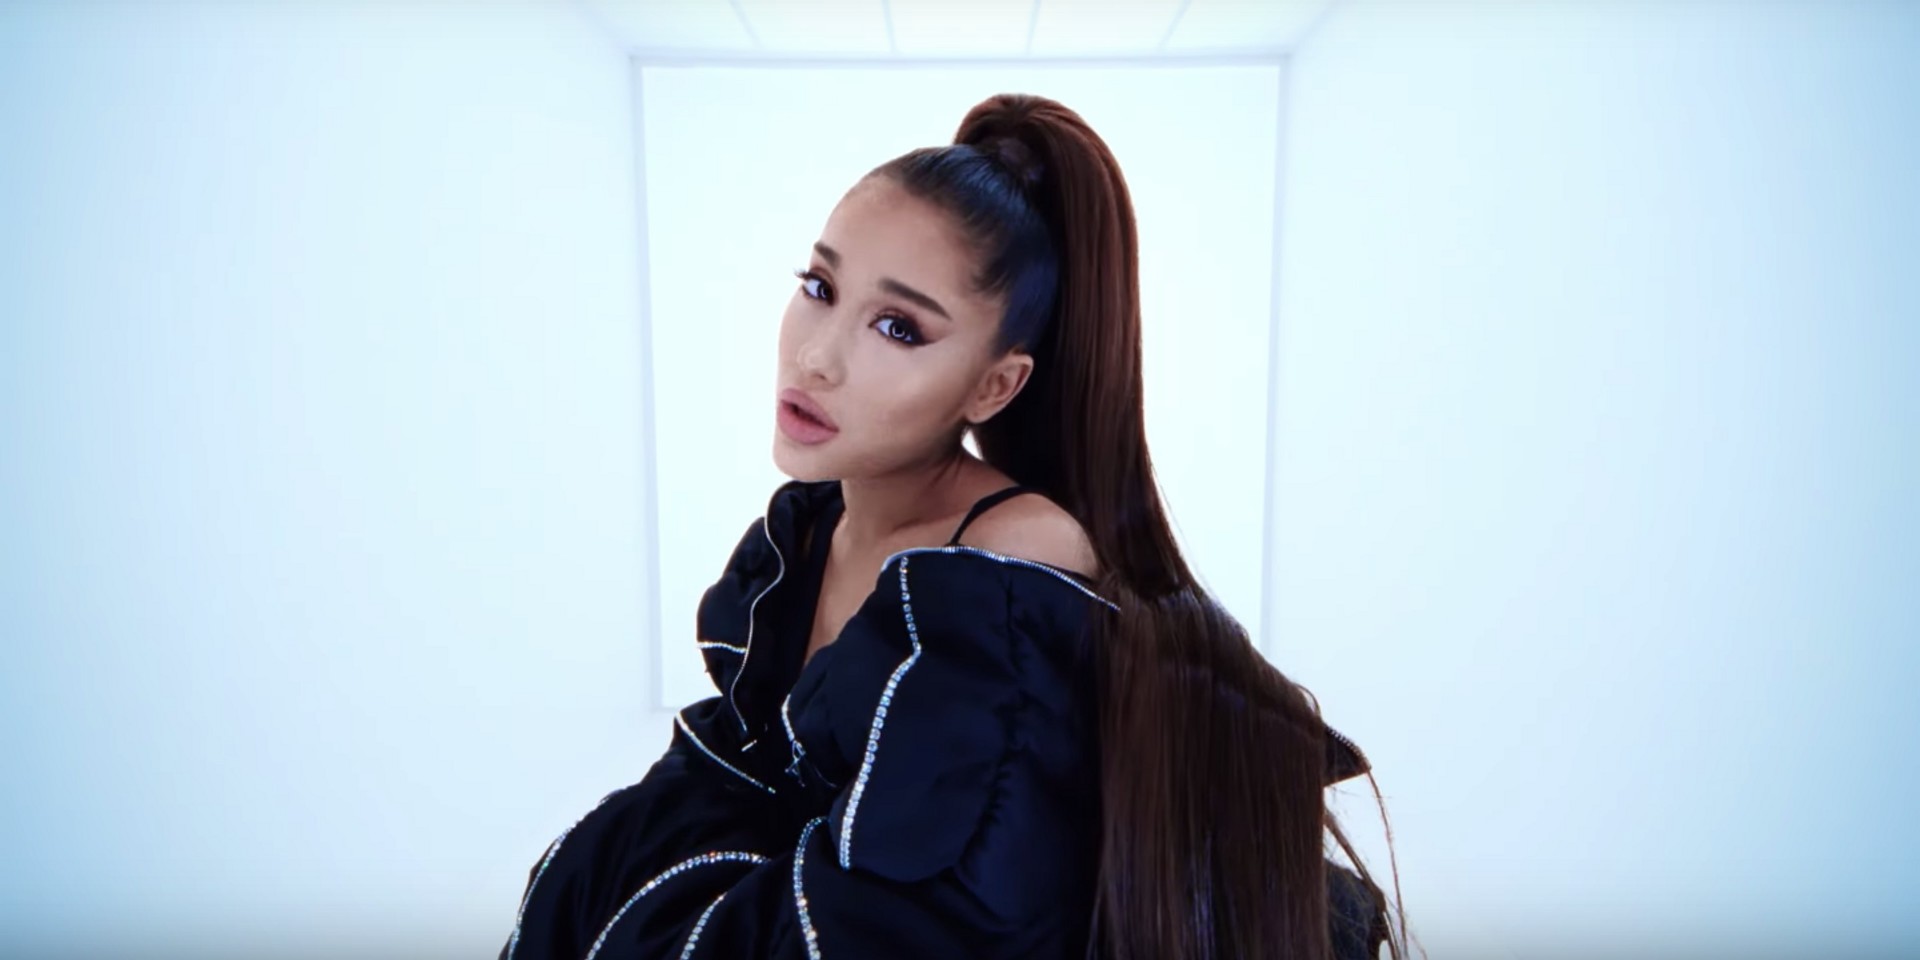 Ariana Grande and Vogue team up to bring you ‘in my head’ music video – watch